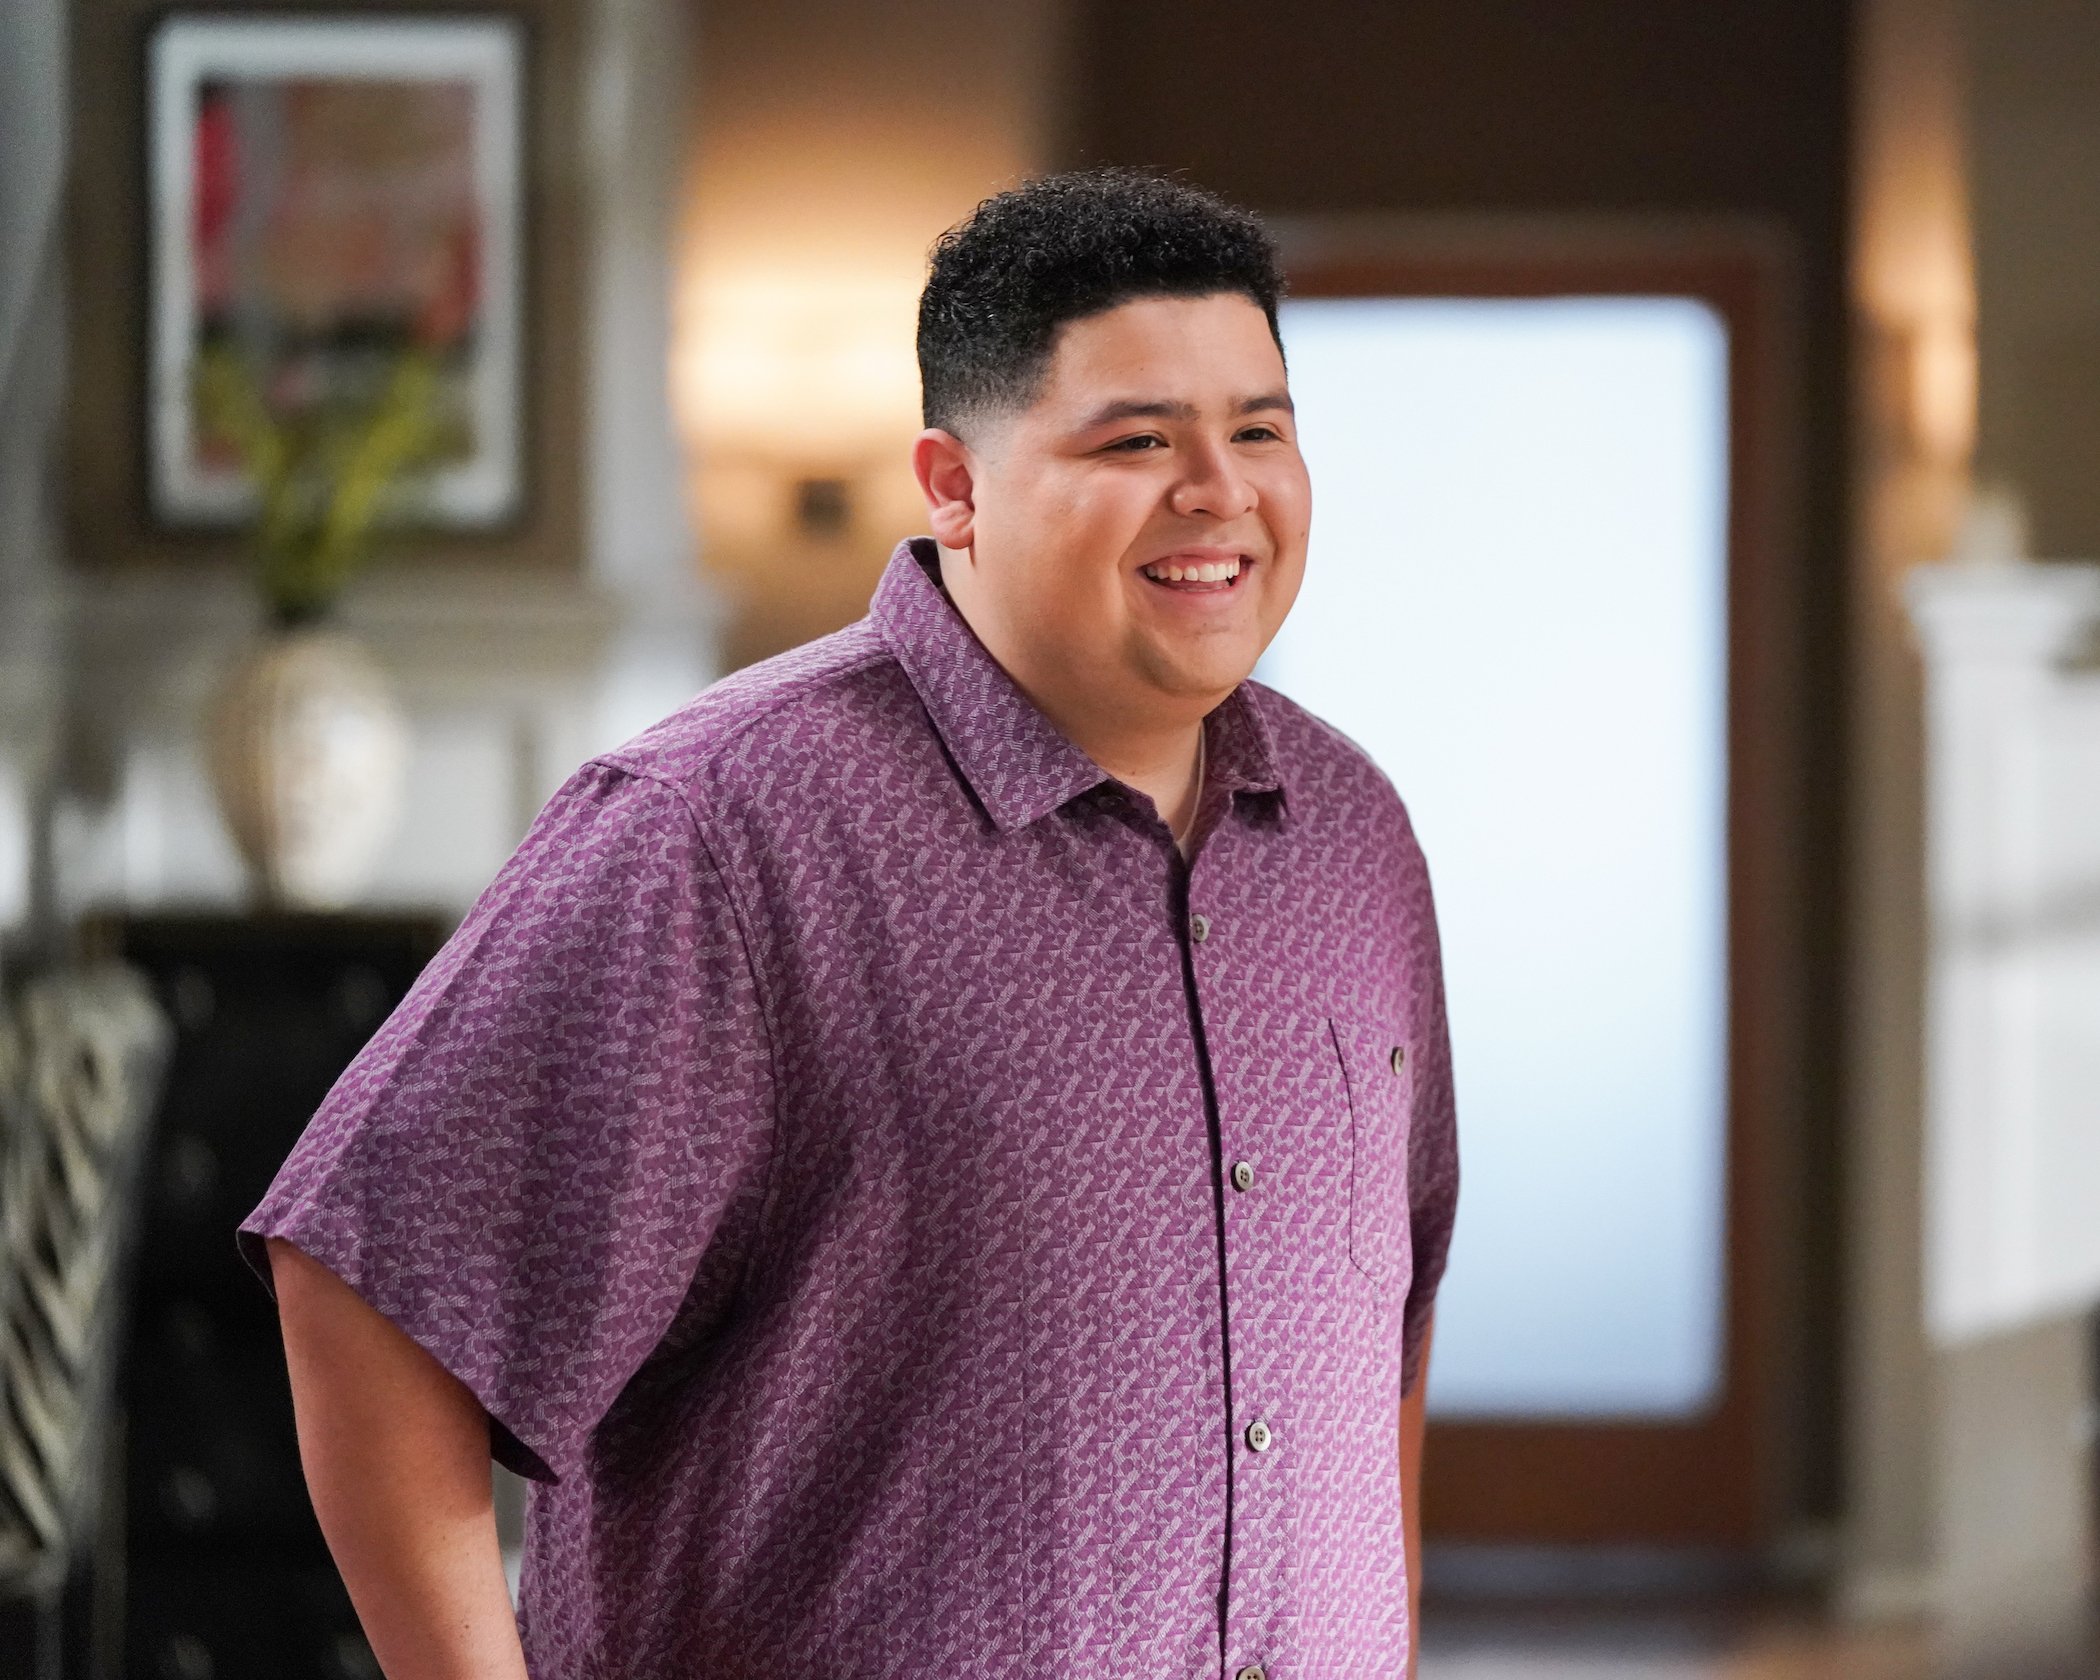 'Modern Family' Who Does Manny End up With?